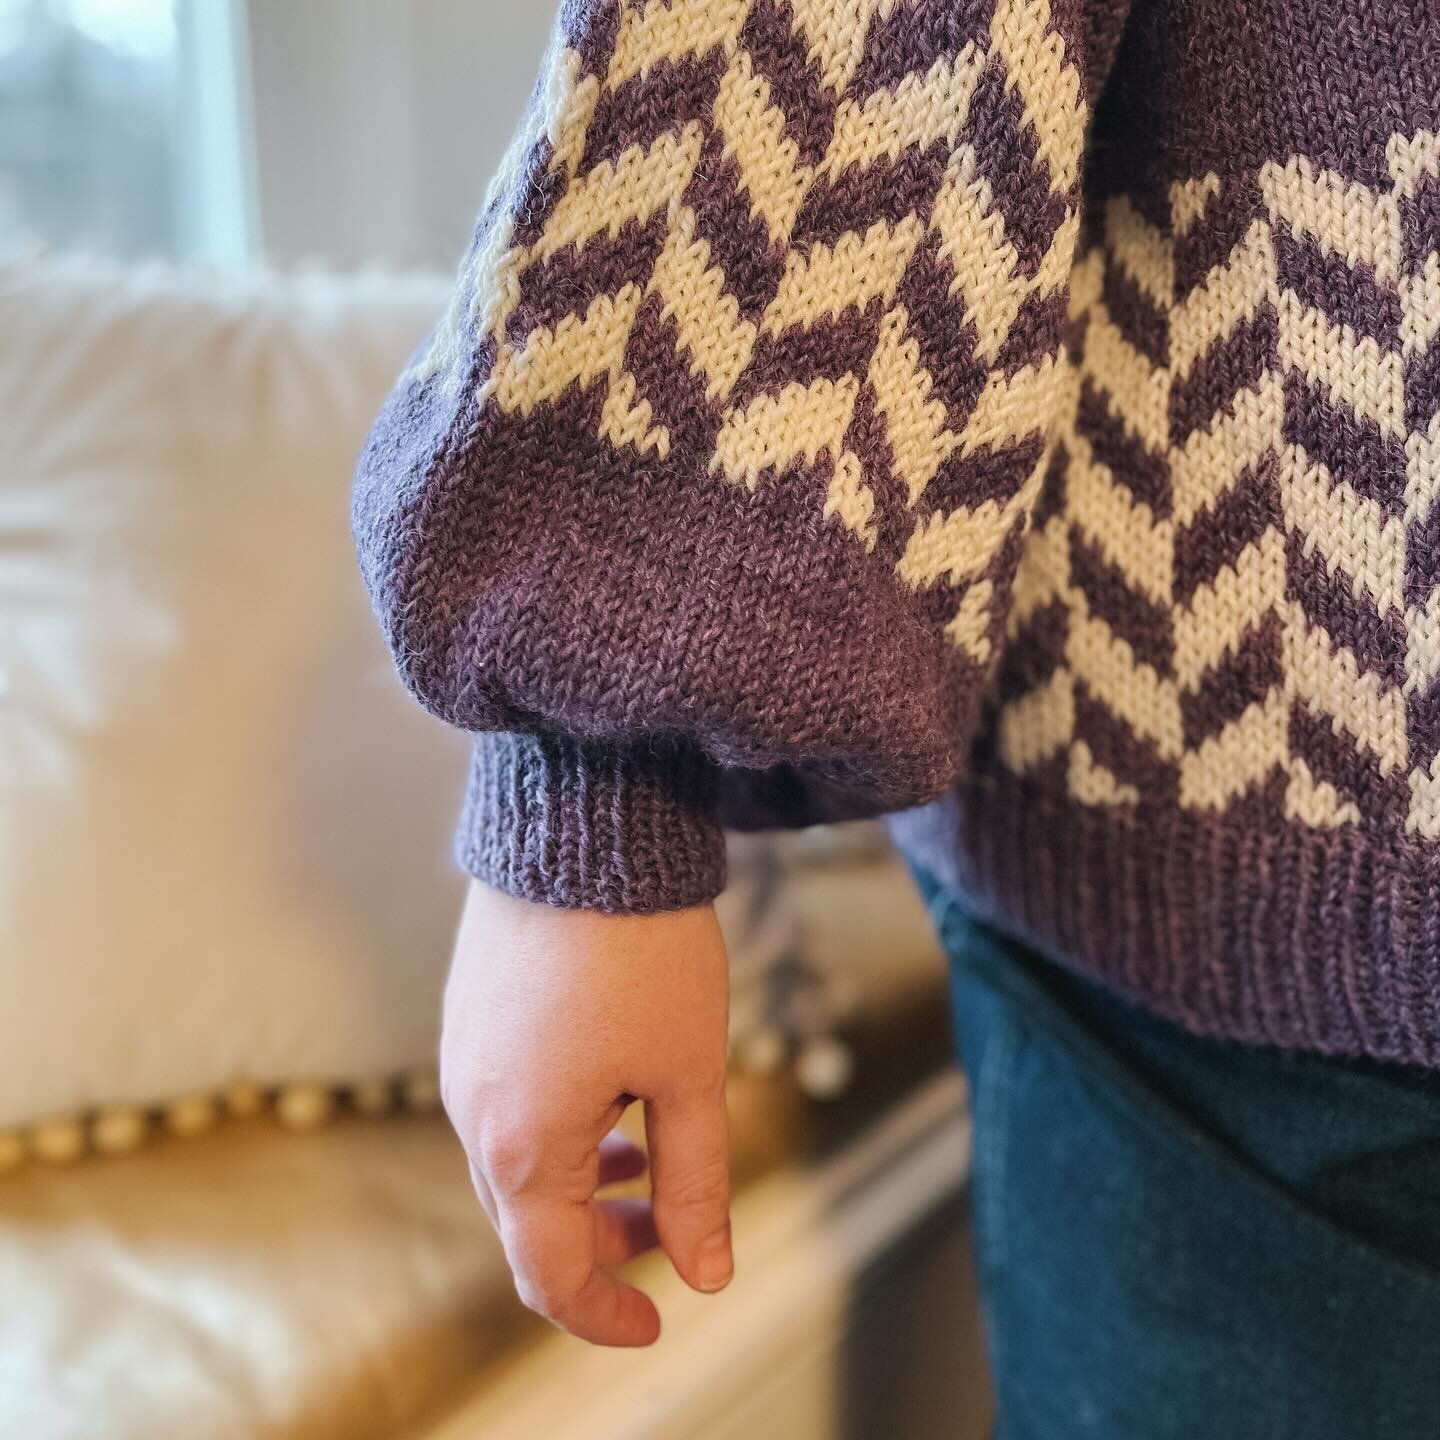 The tiniest sneak peek of my latest finished knit - A SWEATER FOR ME!!!!! Yes, I am actually that excited about this.

Pattern for the #DirectionalPullover coming from @aimeeshermakes soon!